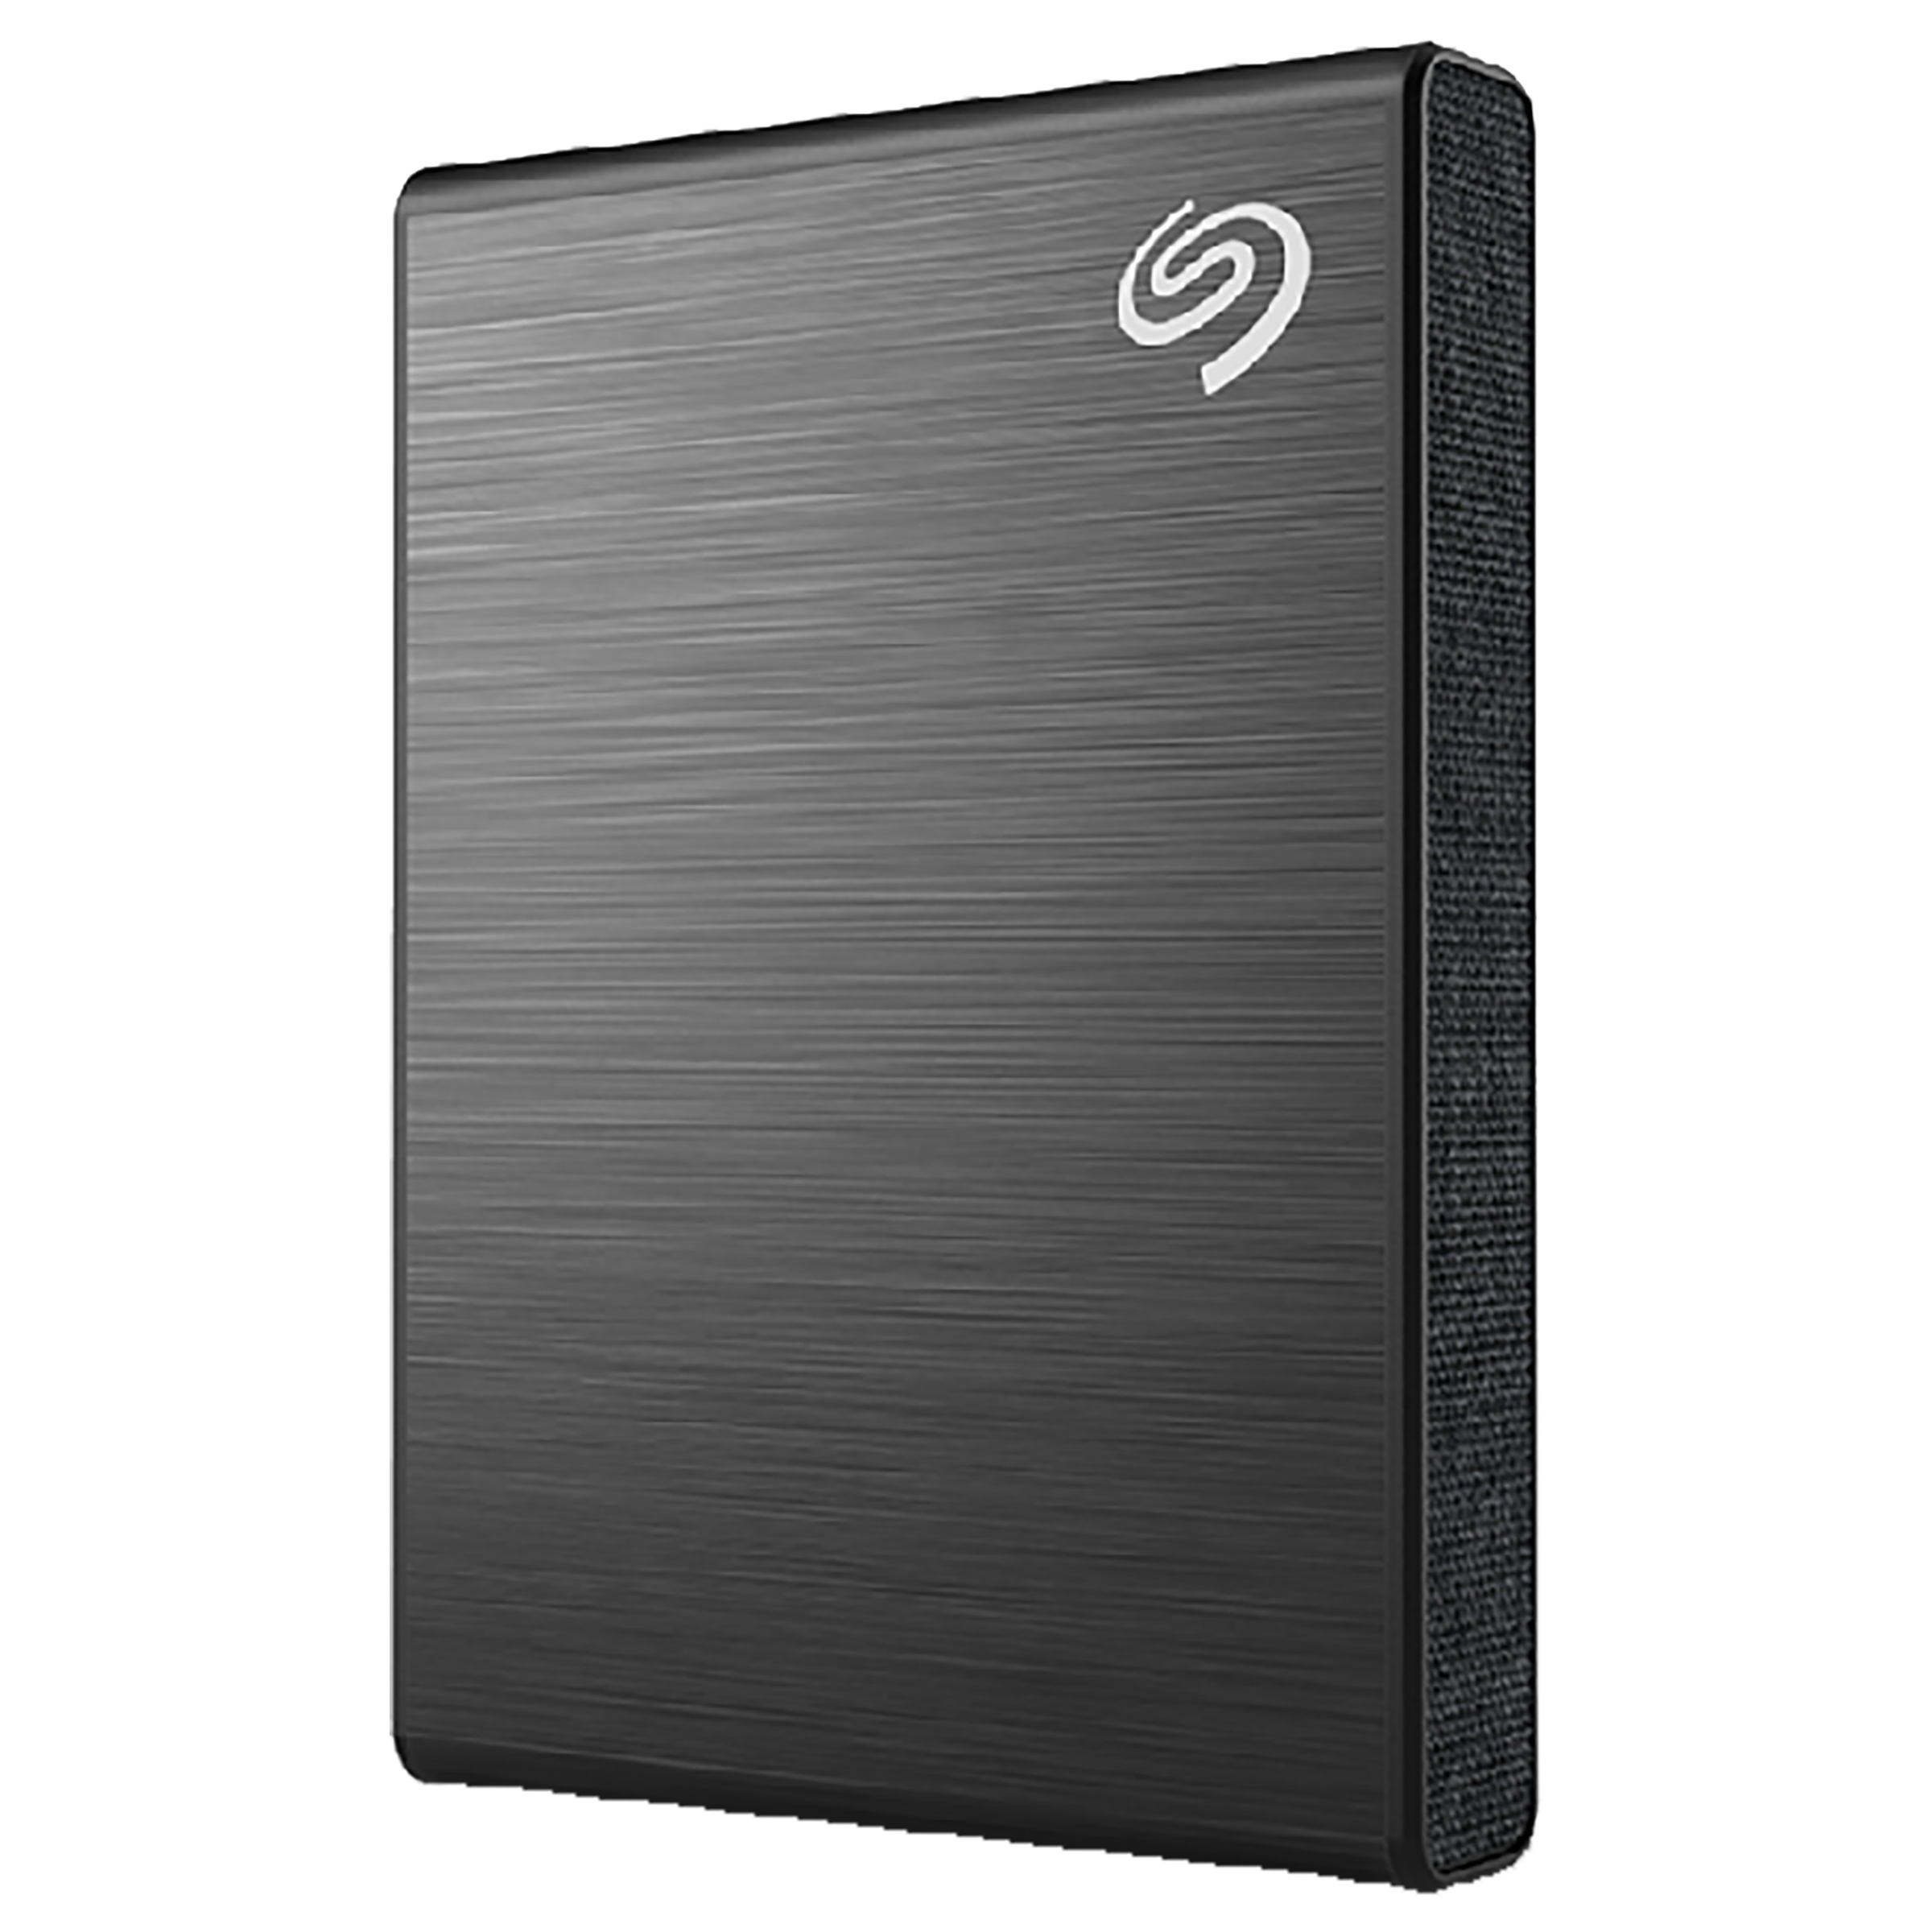 Seagate One Touch 1TB USB 3.0 Hard Disk Drive (Advanced Password Protection, STKY1000400, Black)_1